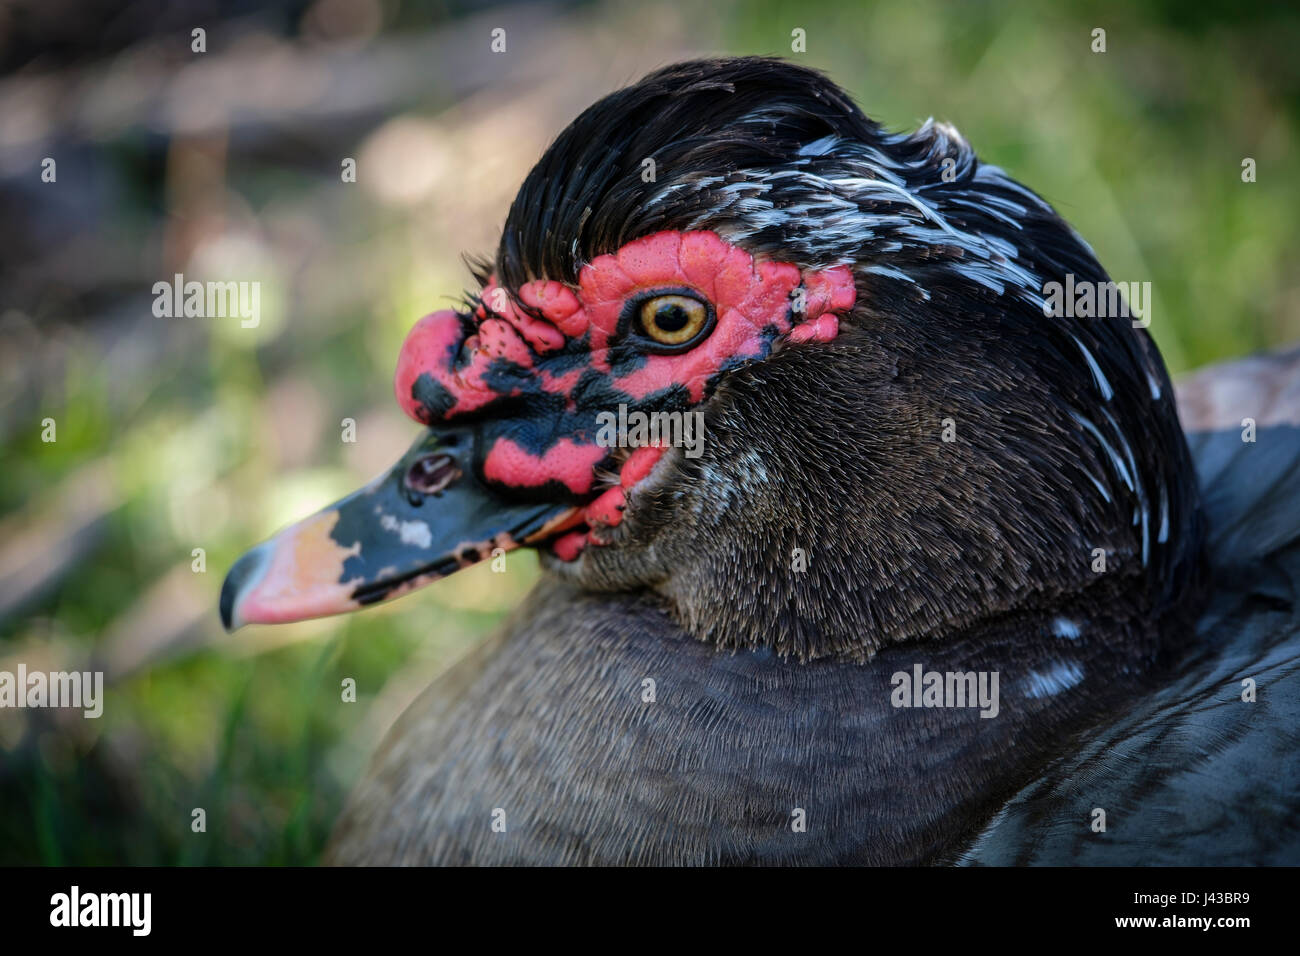 Gray, grey, blue drake Muscovy duck (Cairina moschata) portrait, close-up, face, feral duck, male, black crest, red caruncling, looking at camera. Stock Photo